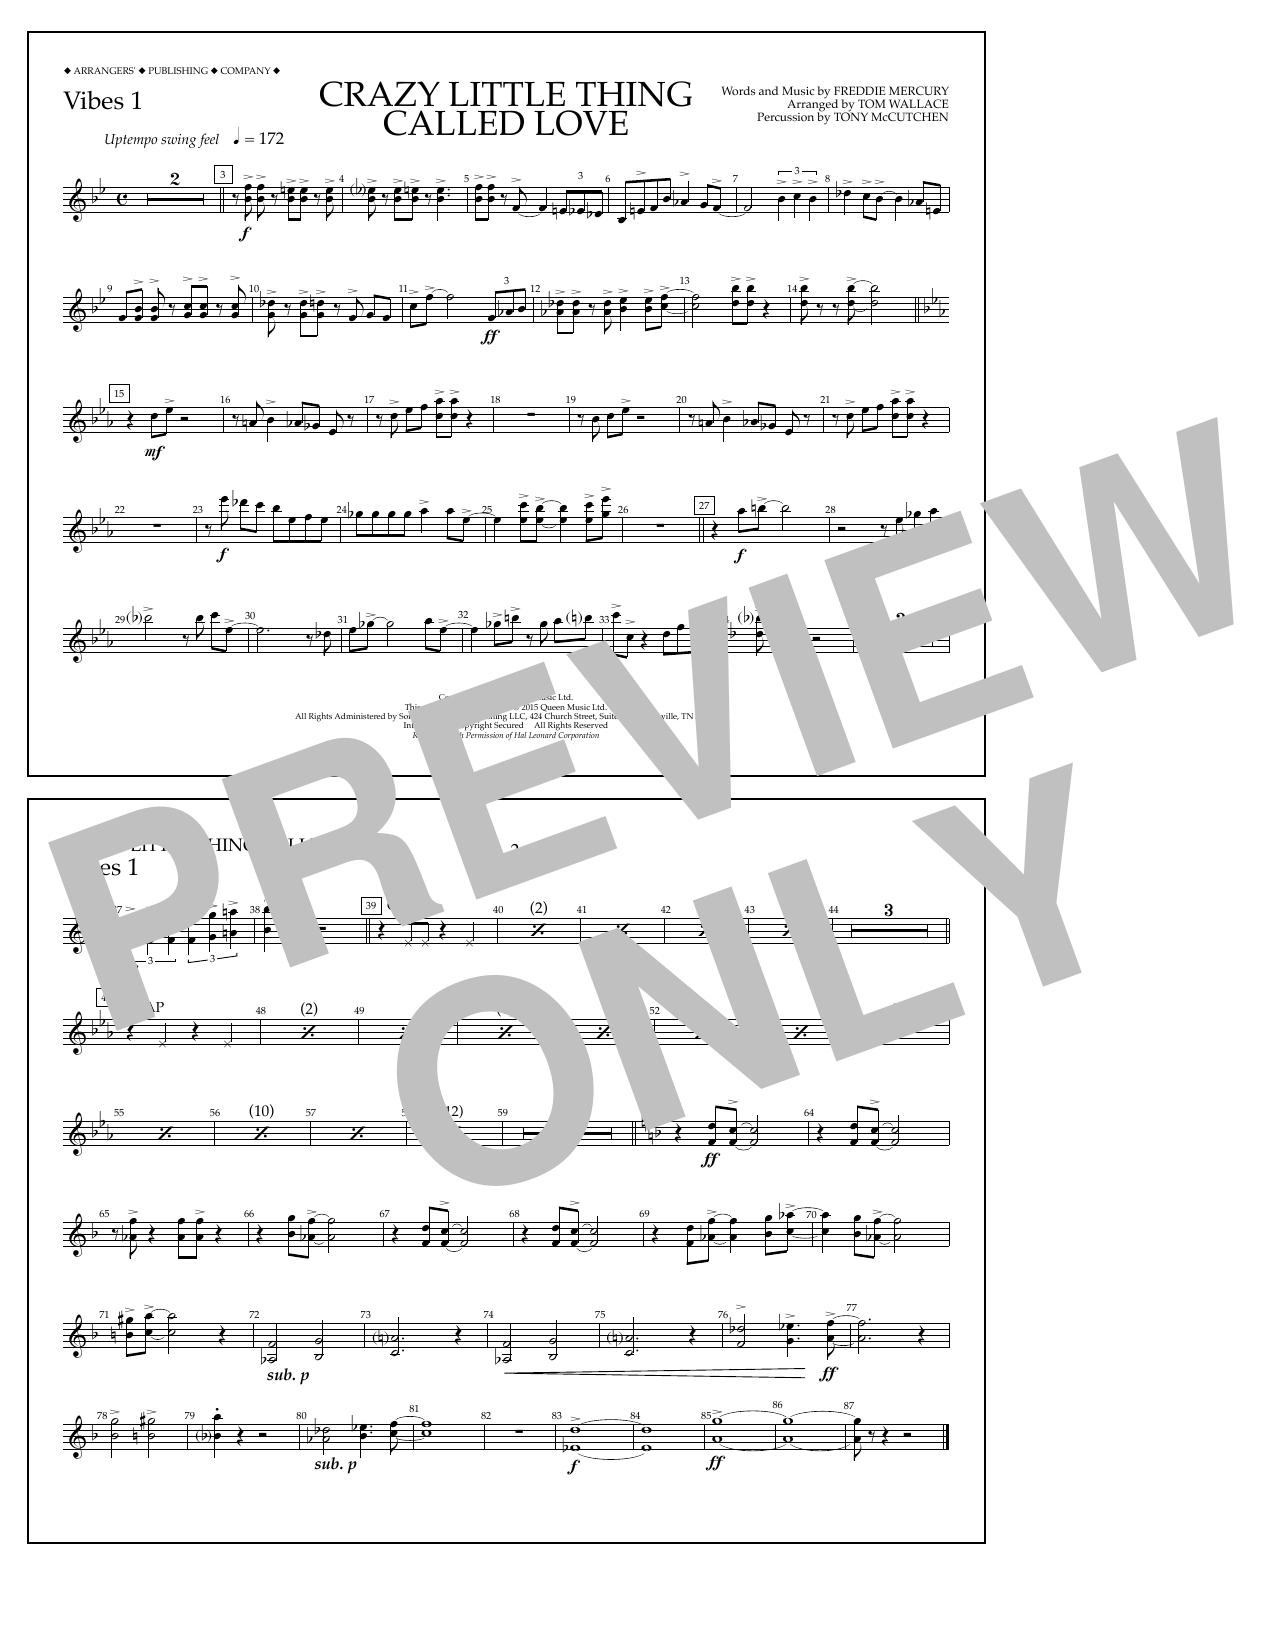 Download Tom Wallace Crazy Little Thing Called Love - Vibes Sheet Music